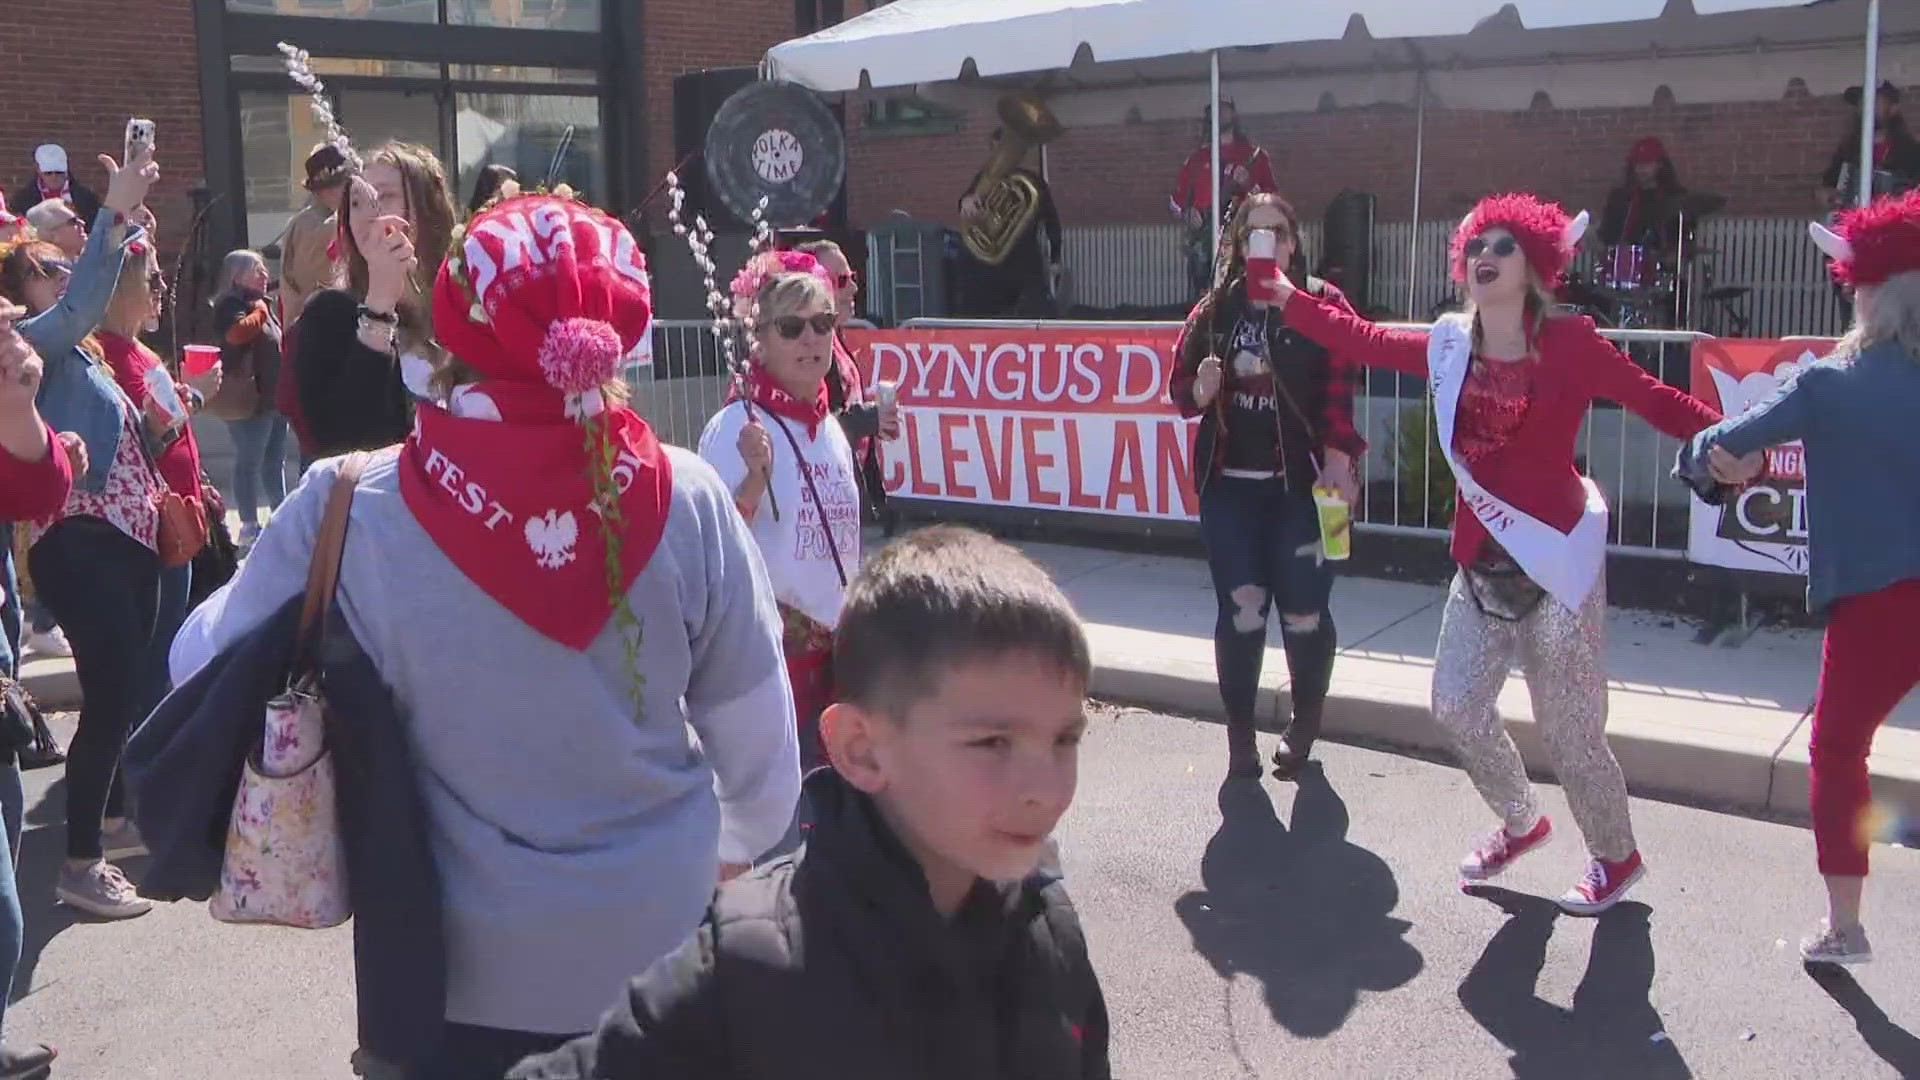 Cleveland's 12th annual Dyngus Day Polish celebration with take place Monday in the Gordon Square Arts District.